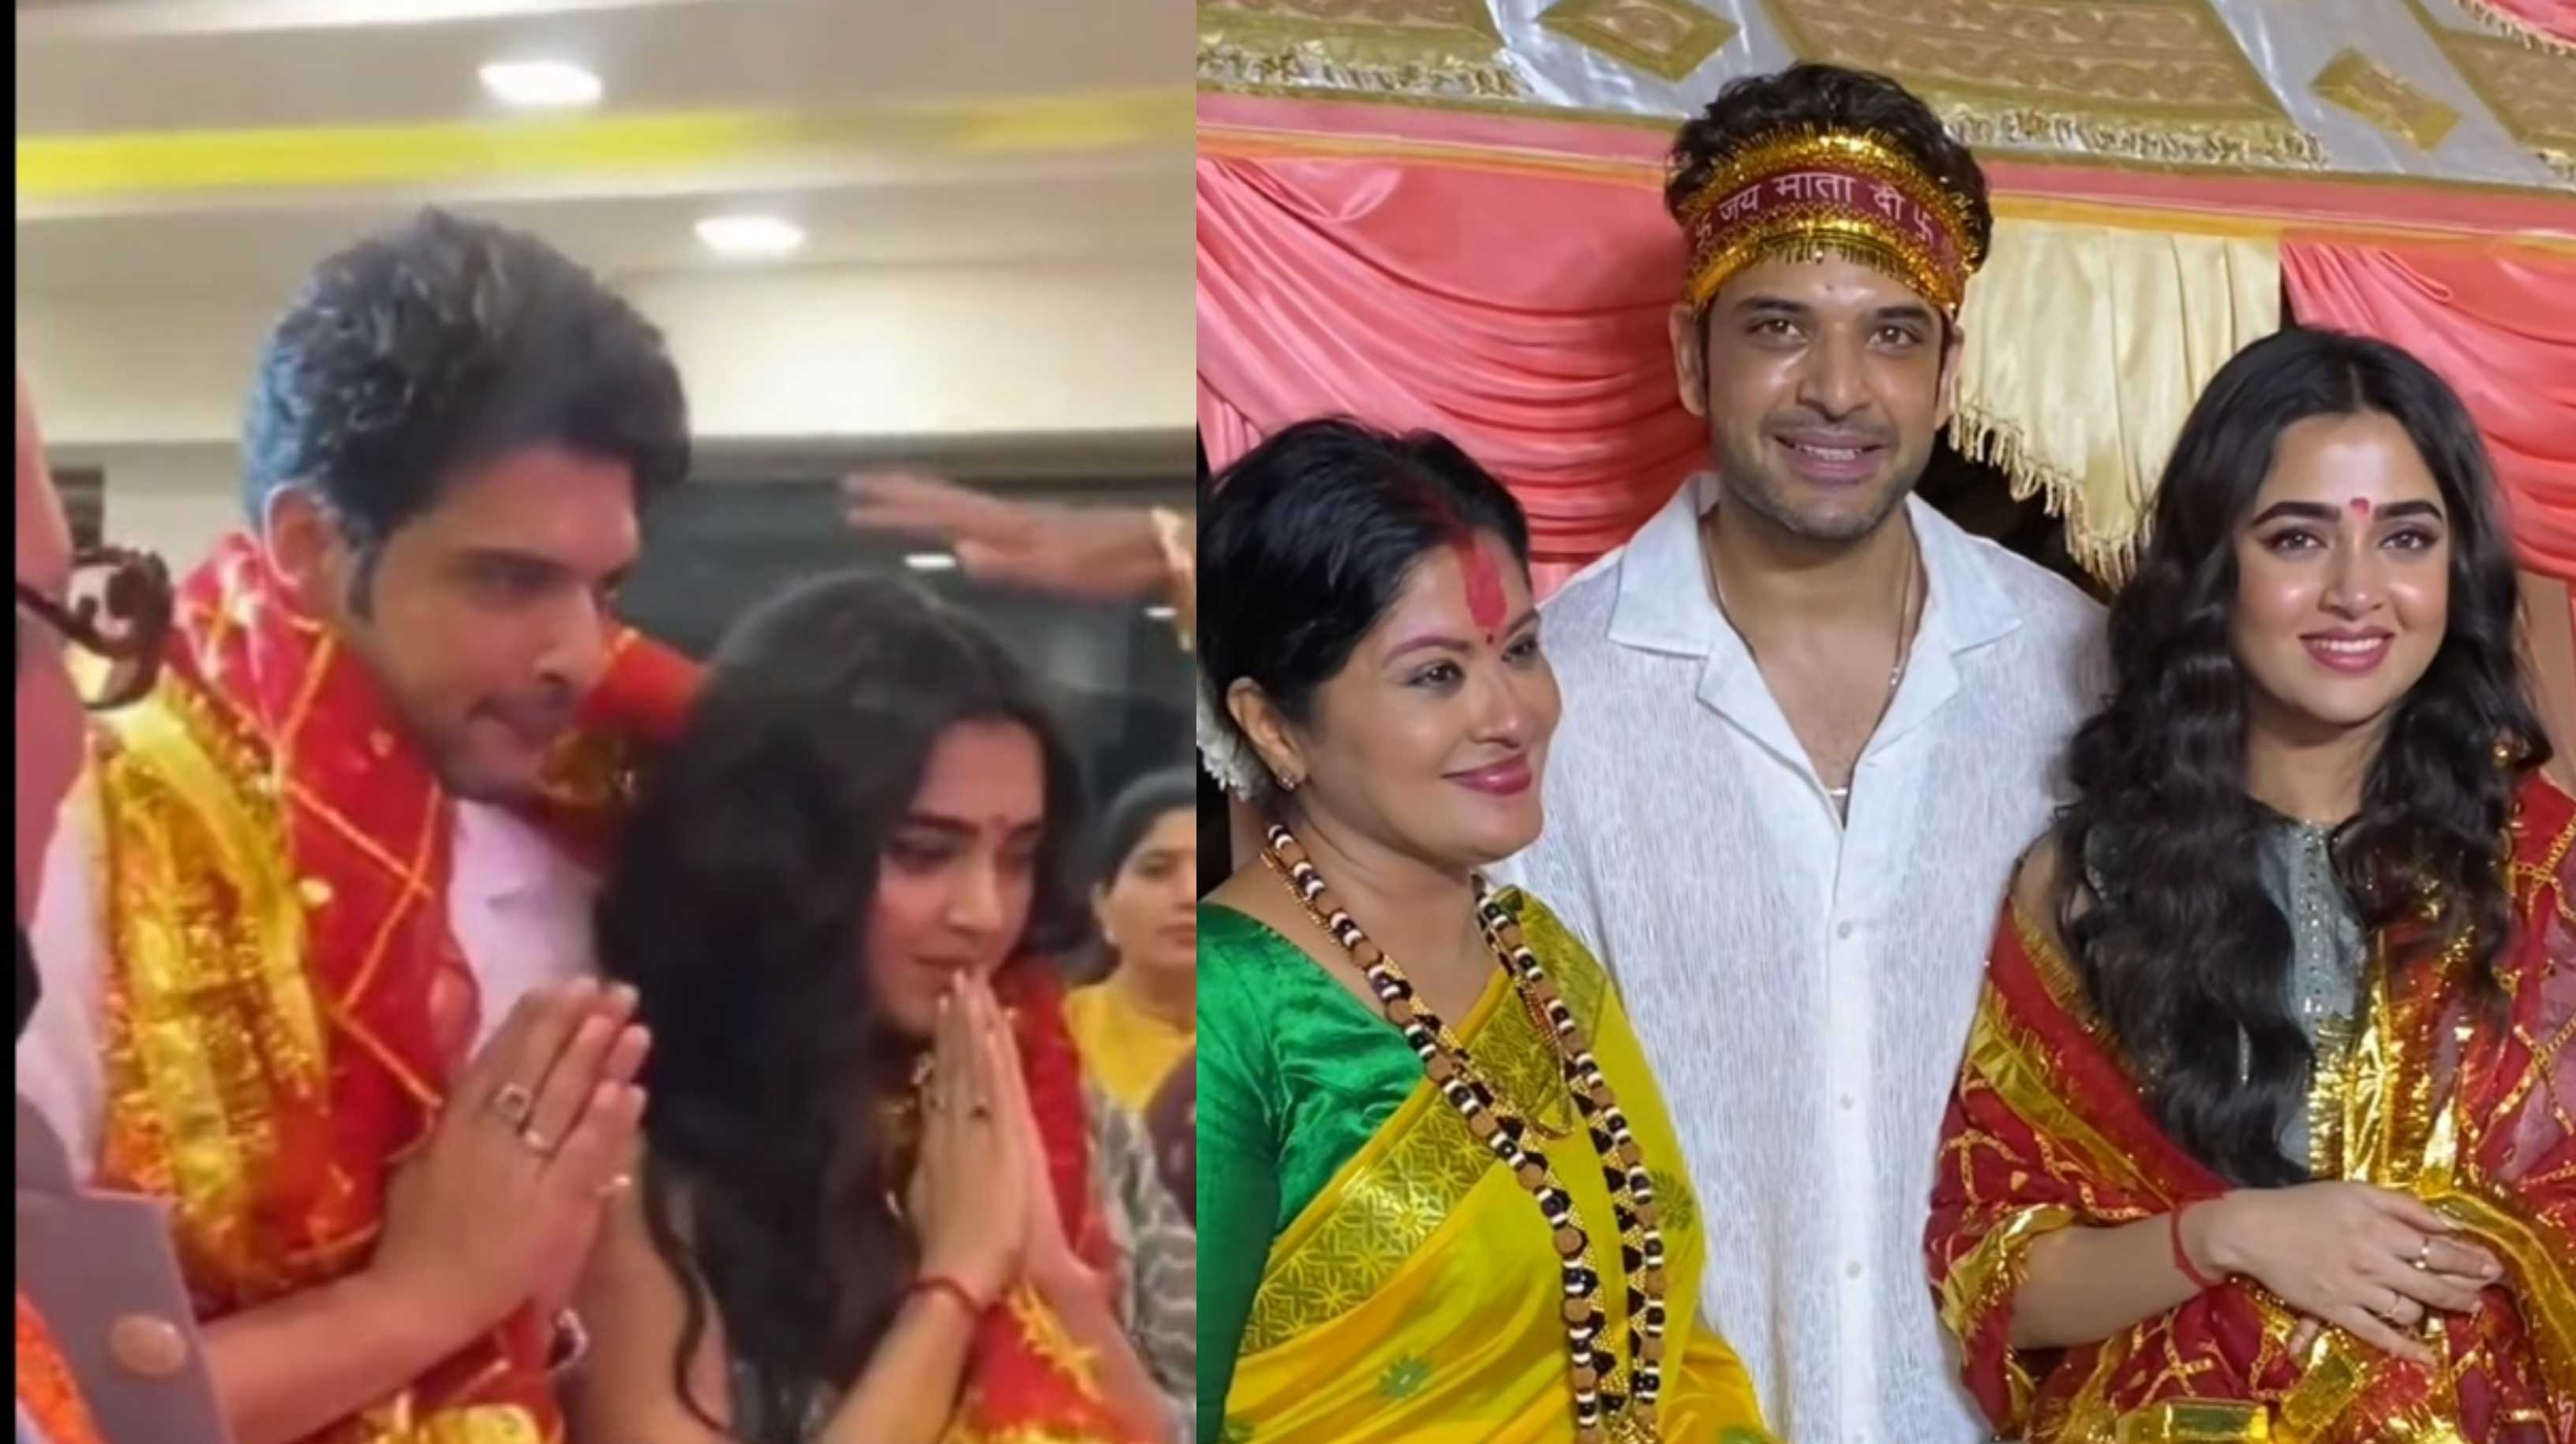 Tejasswi Prakash and Karan Kundrra give fans ‘married couple vibes’ as they attend Mata Ki Chowki together; watch